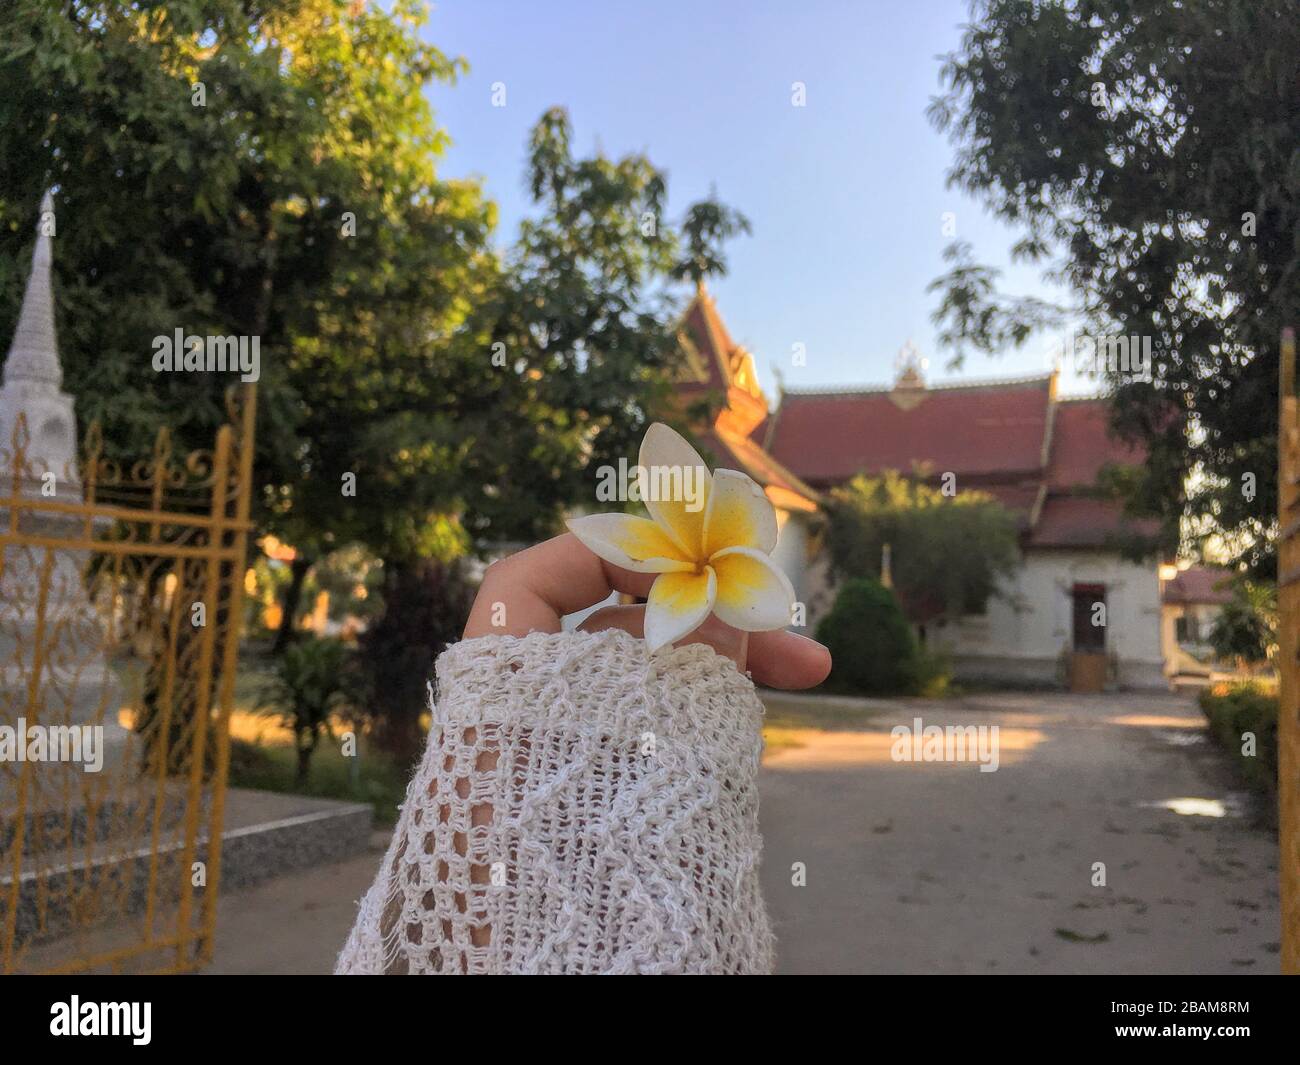 Frangipani, Plumeria, White Bright Yellow Flower held in Hand in front of Buddhist Temple in Vientiane, Laos Republic Stock Photo